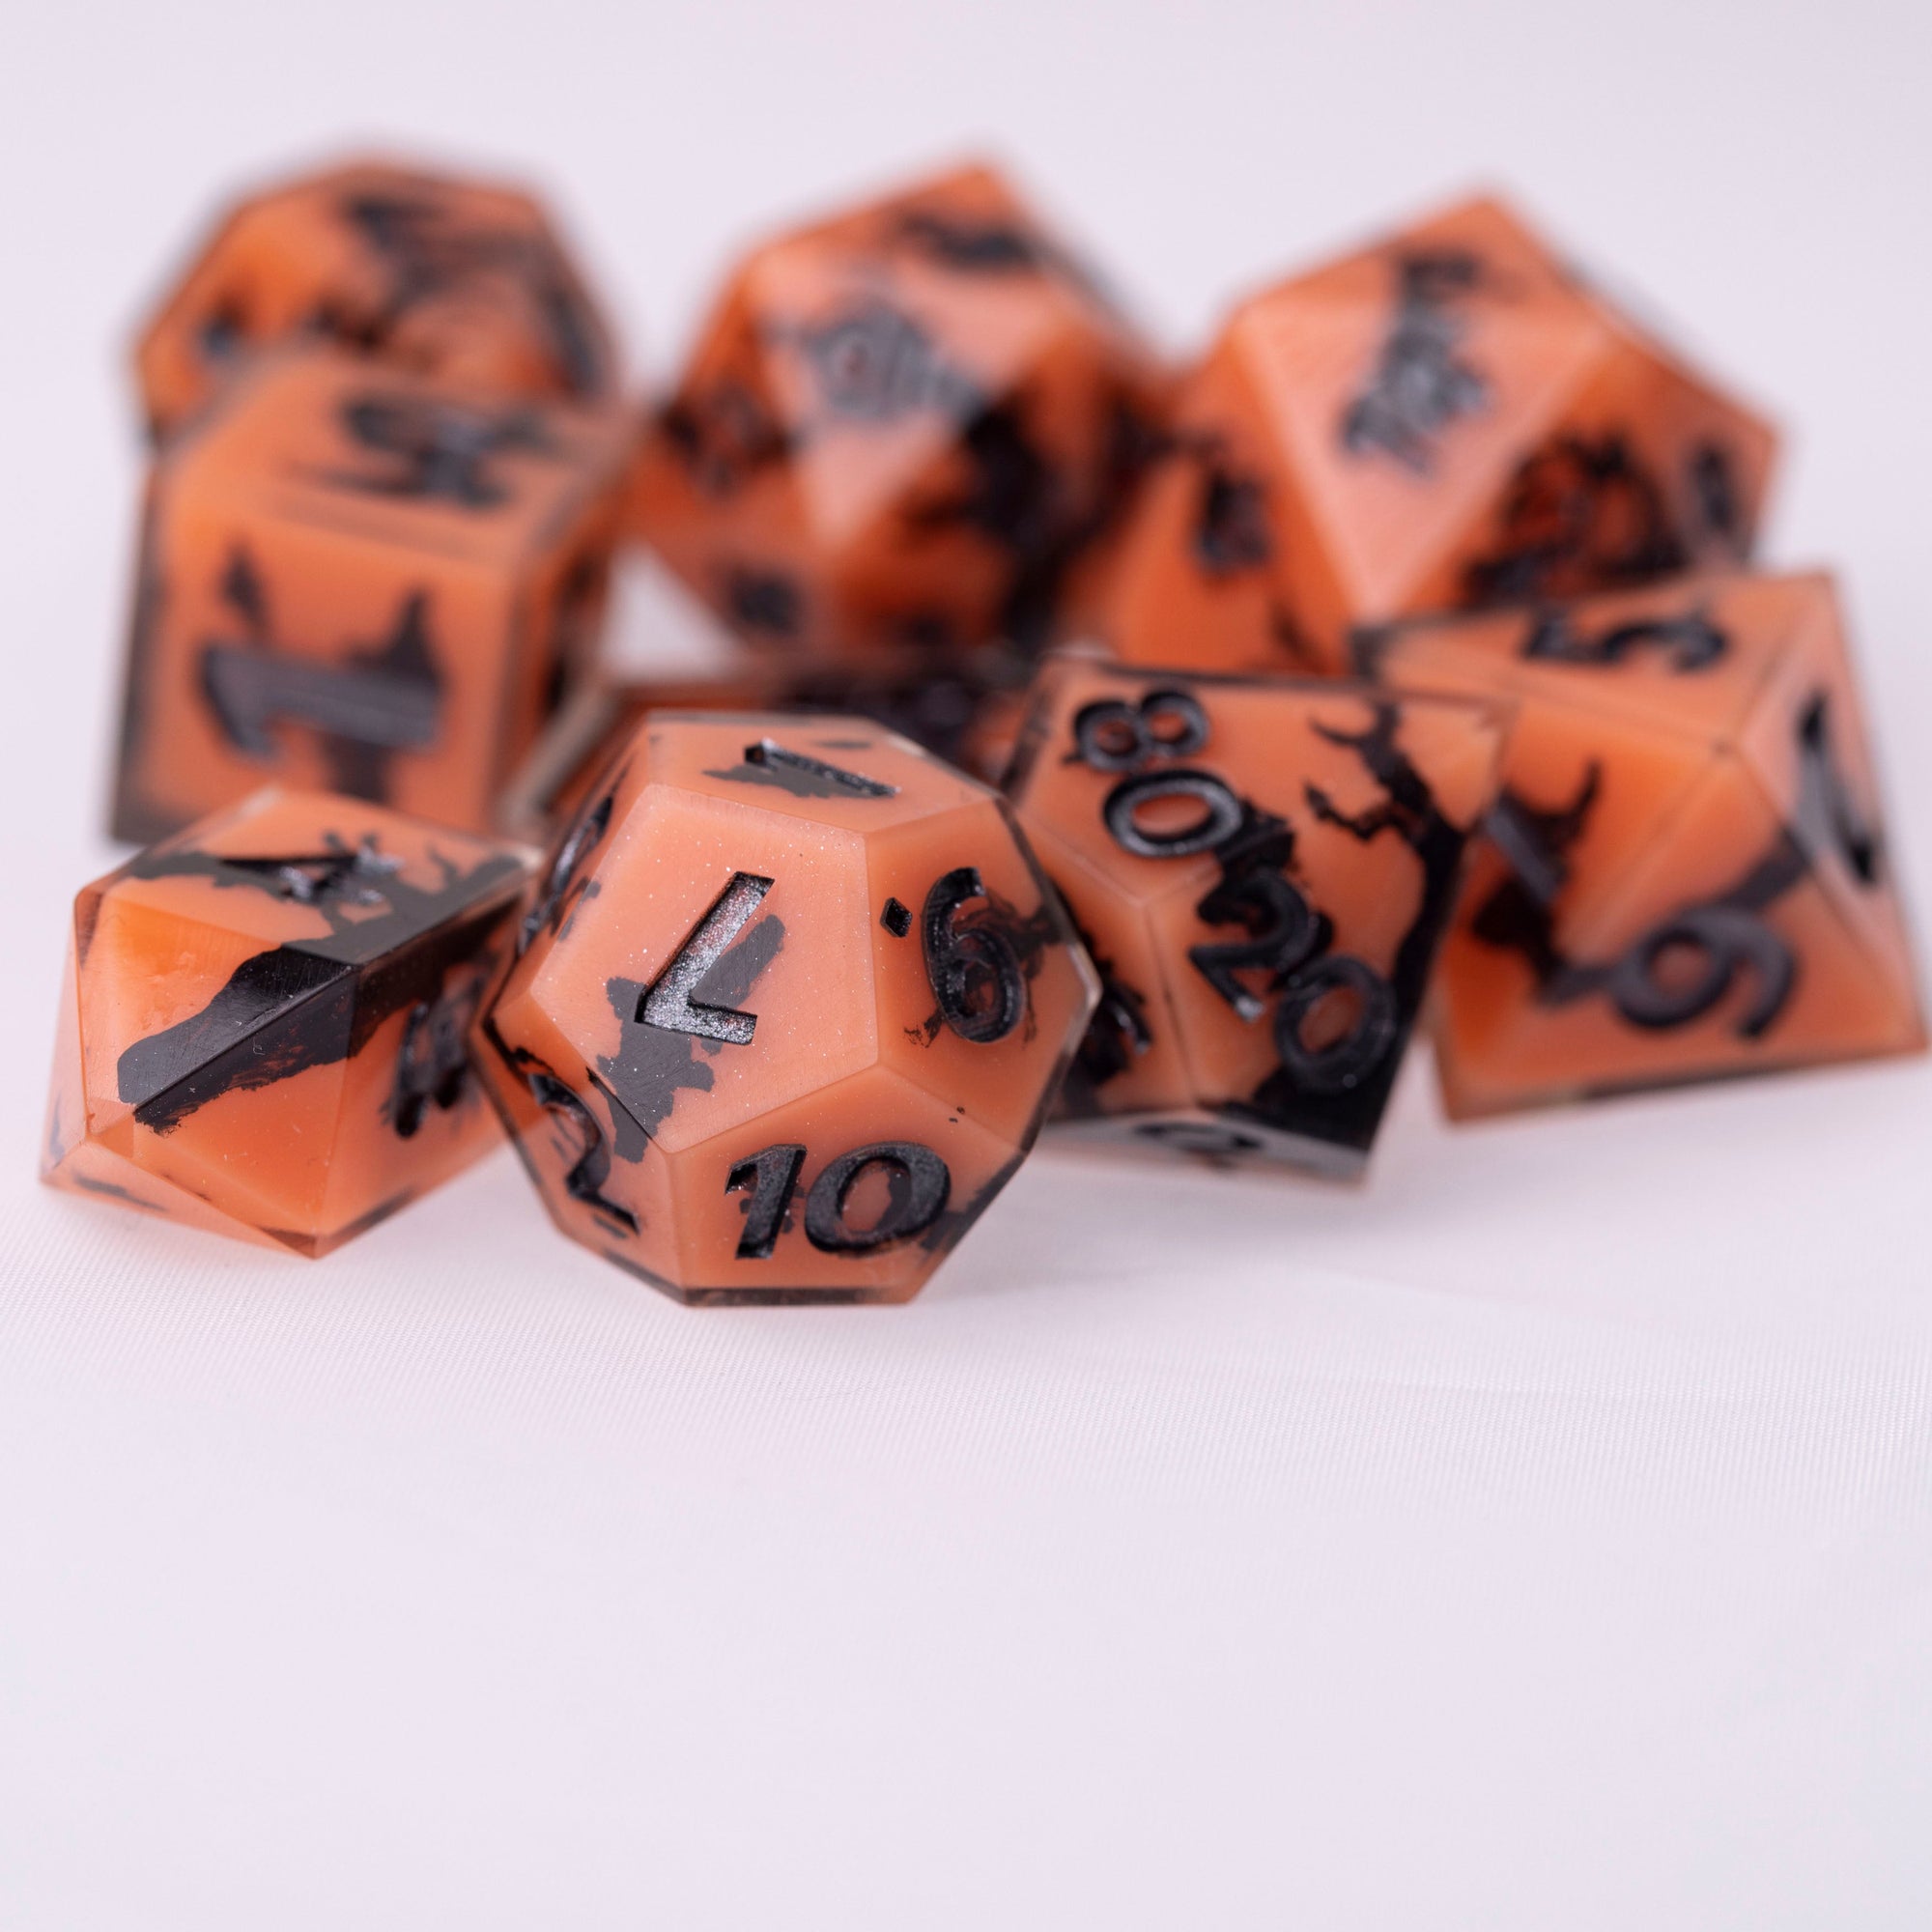 Creepy Critters of the Night - D20 + D4 Dice Sets